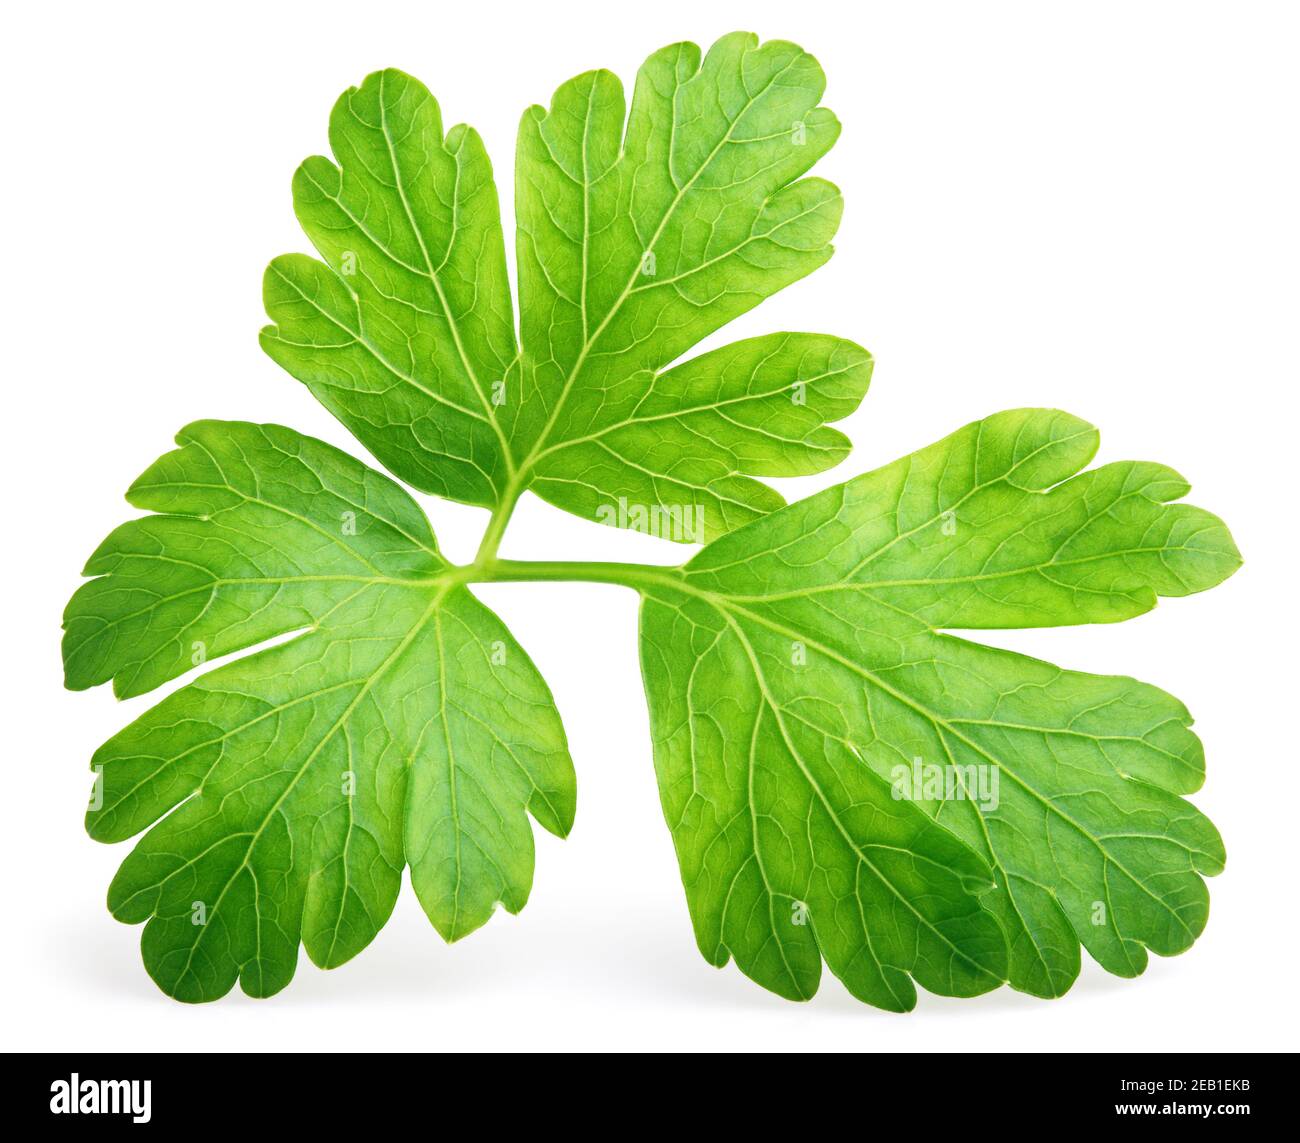 Garden parsley herb (coriander) leaf isolated on white background with clipping path Stock Photo